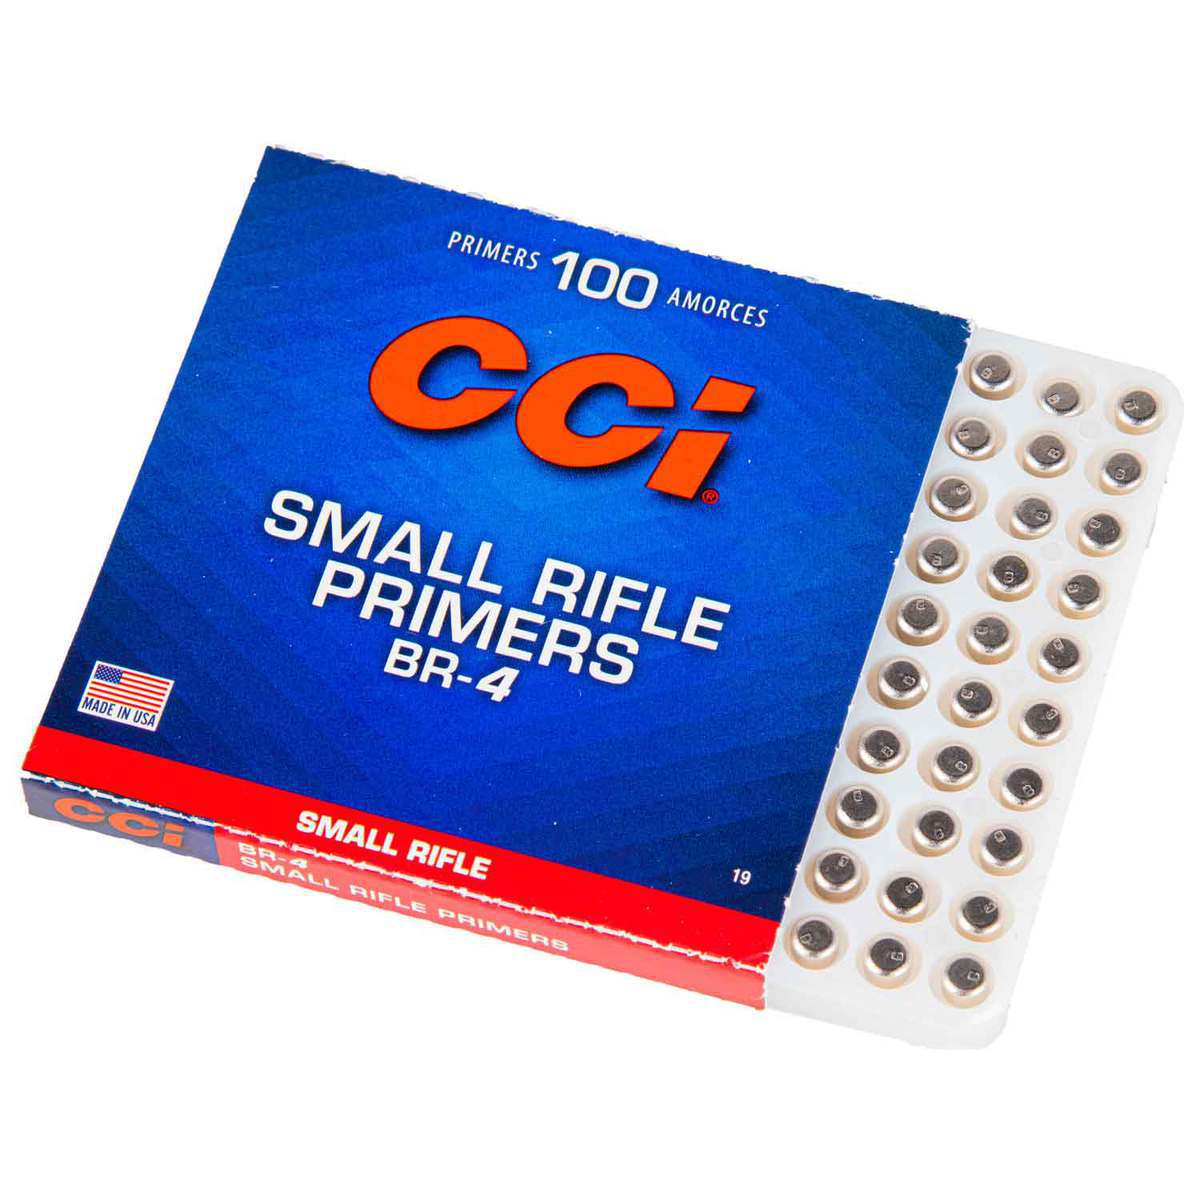 Cci Br4 Small Rifle Primers 100 Count Small Rifle Sportsmans